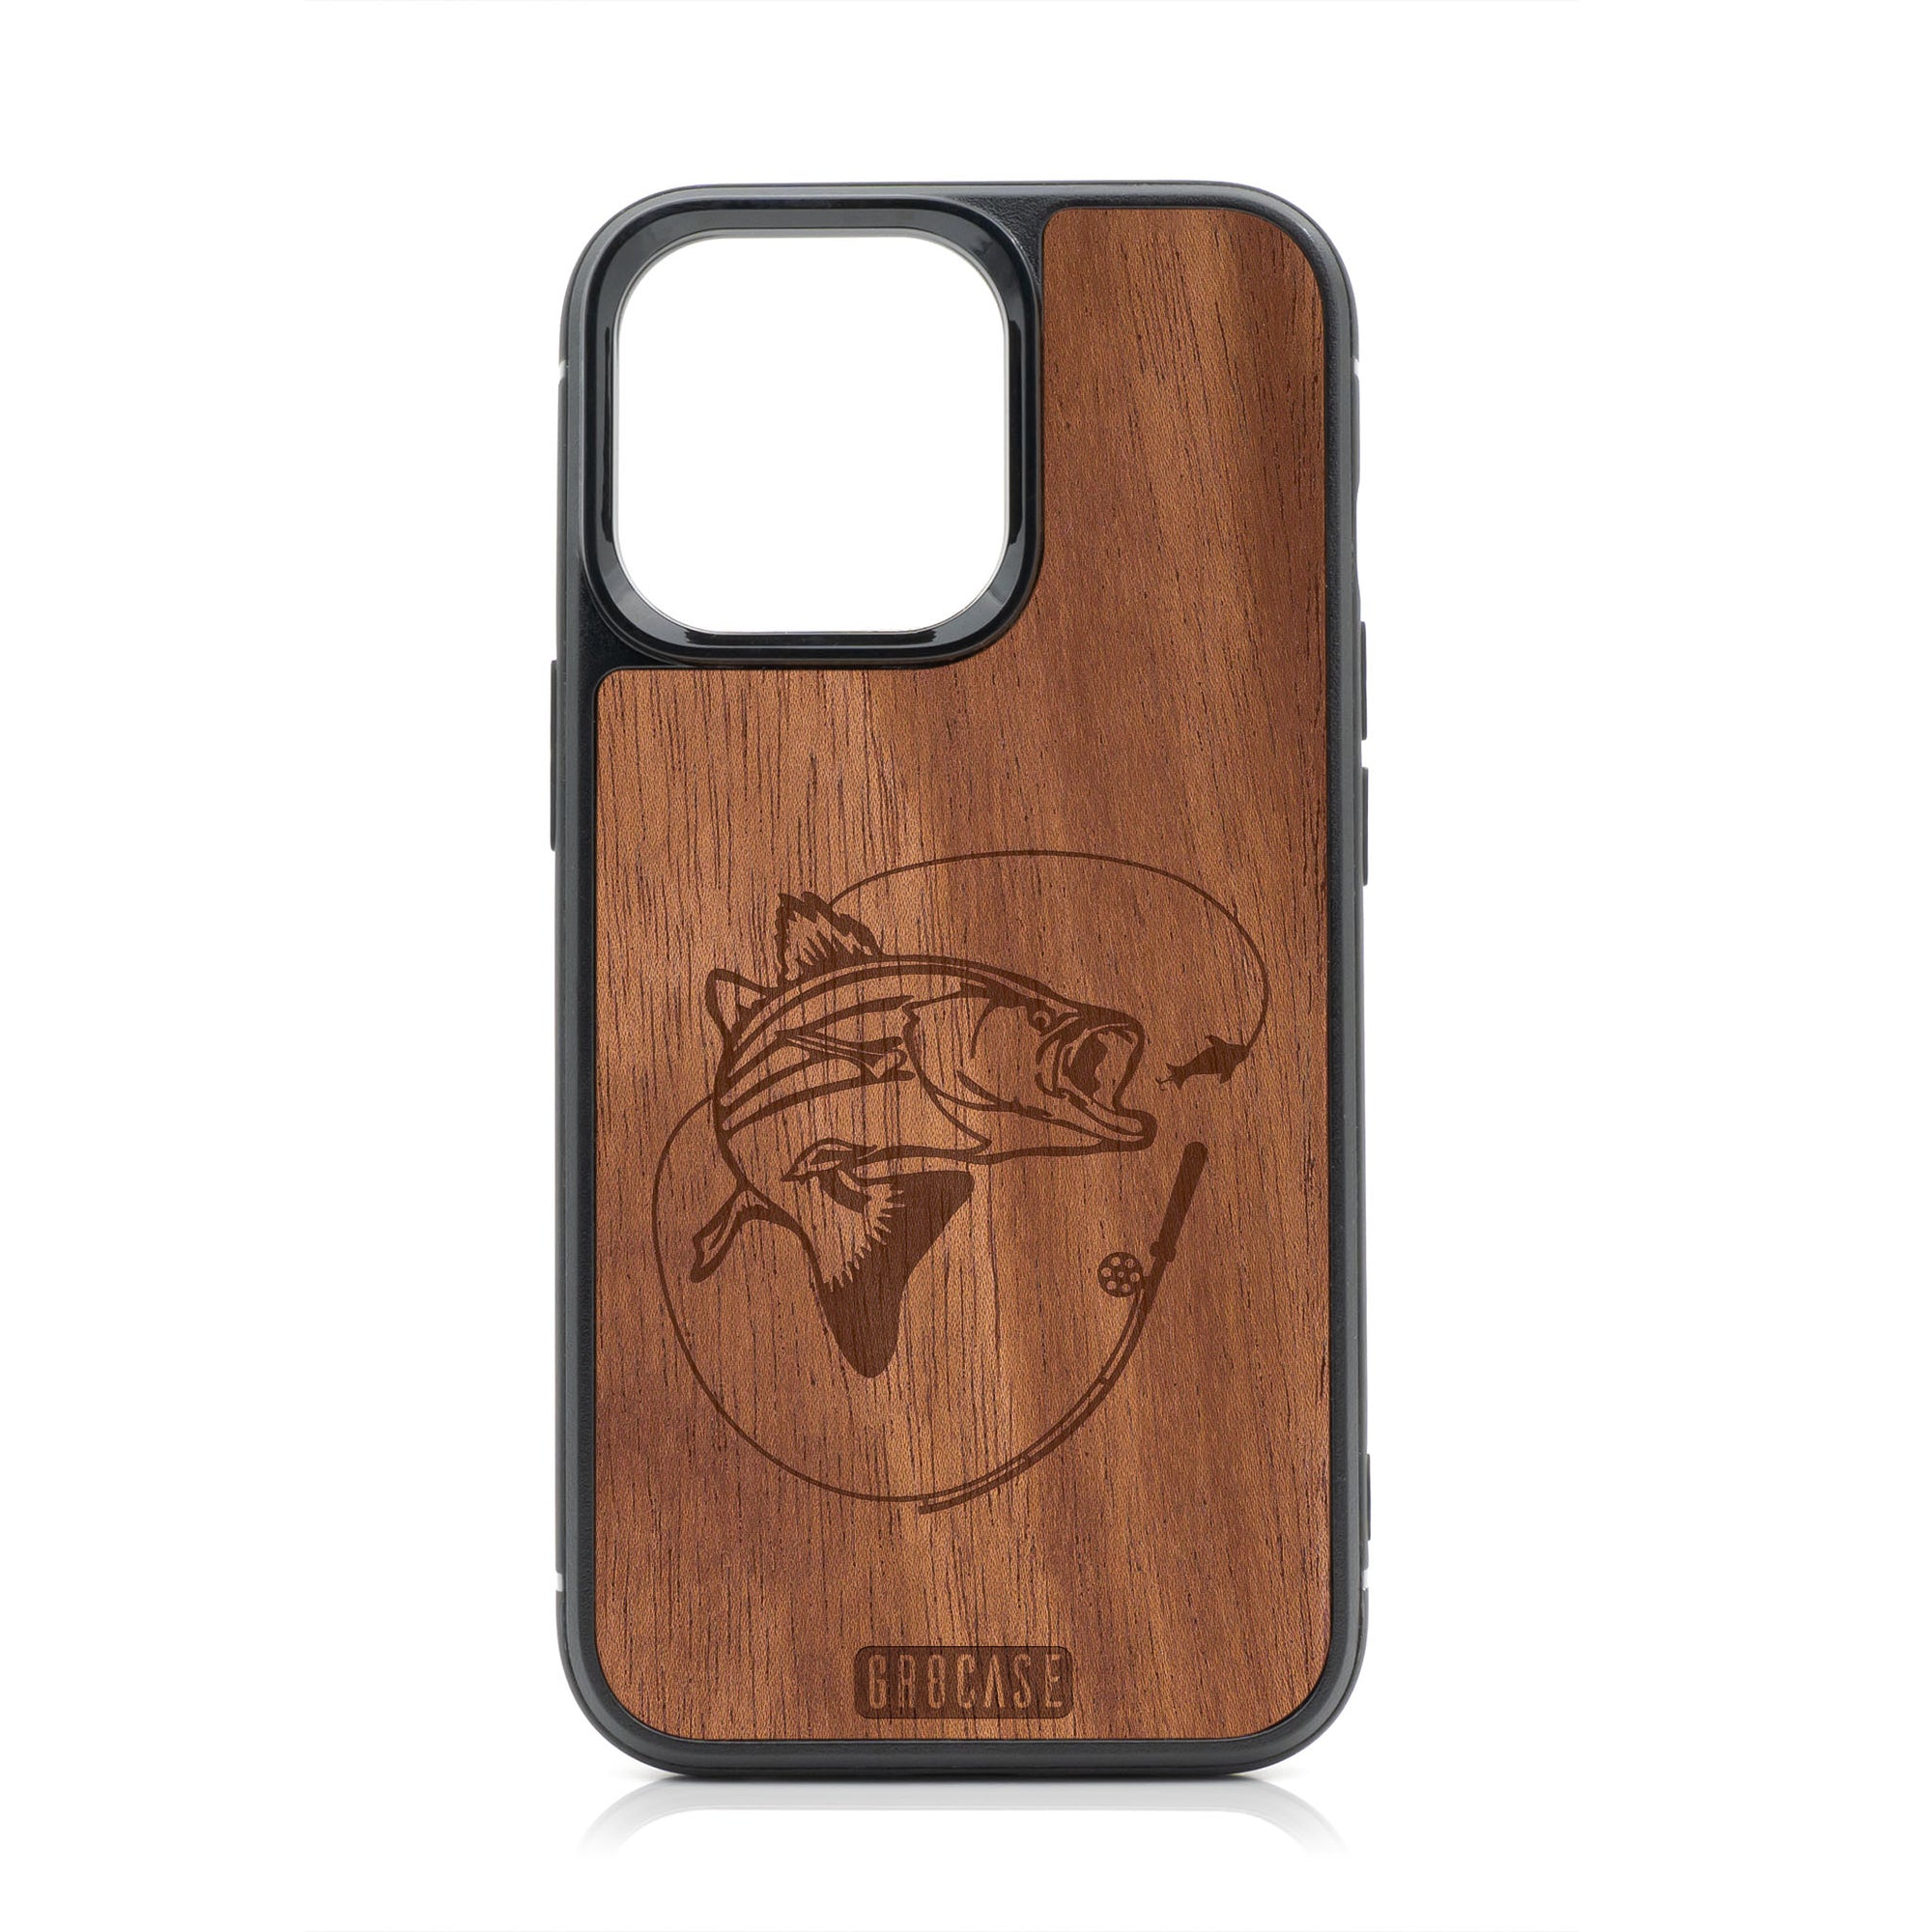 Fish and Reel Design Wood Case For iPhone 13 Pro